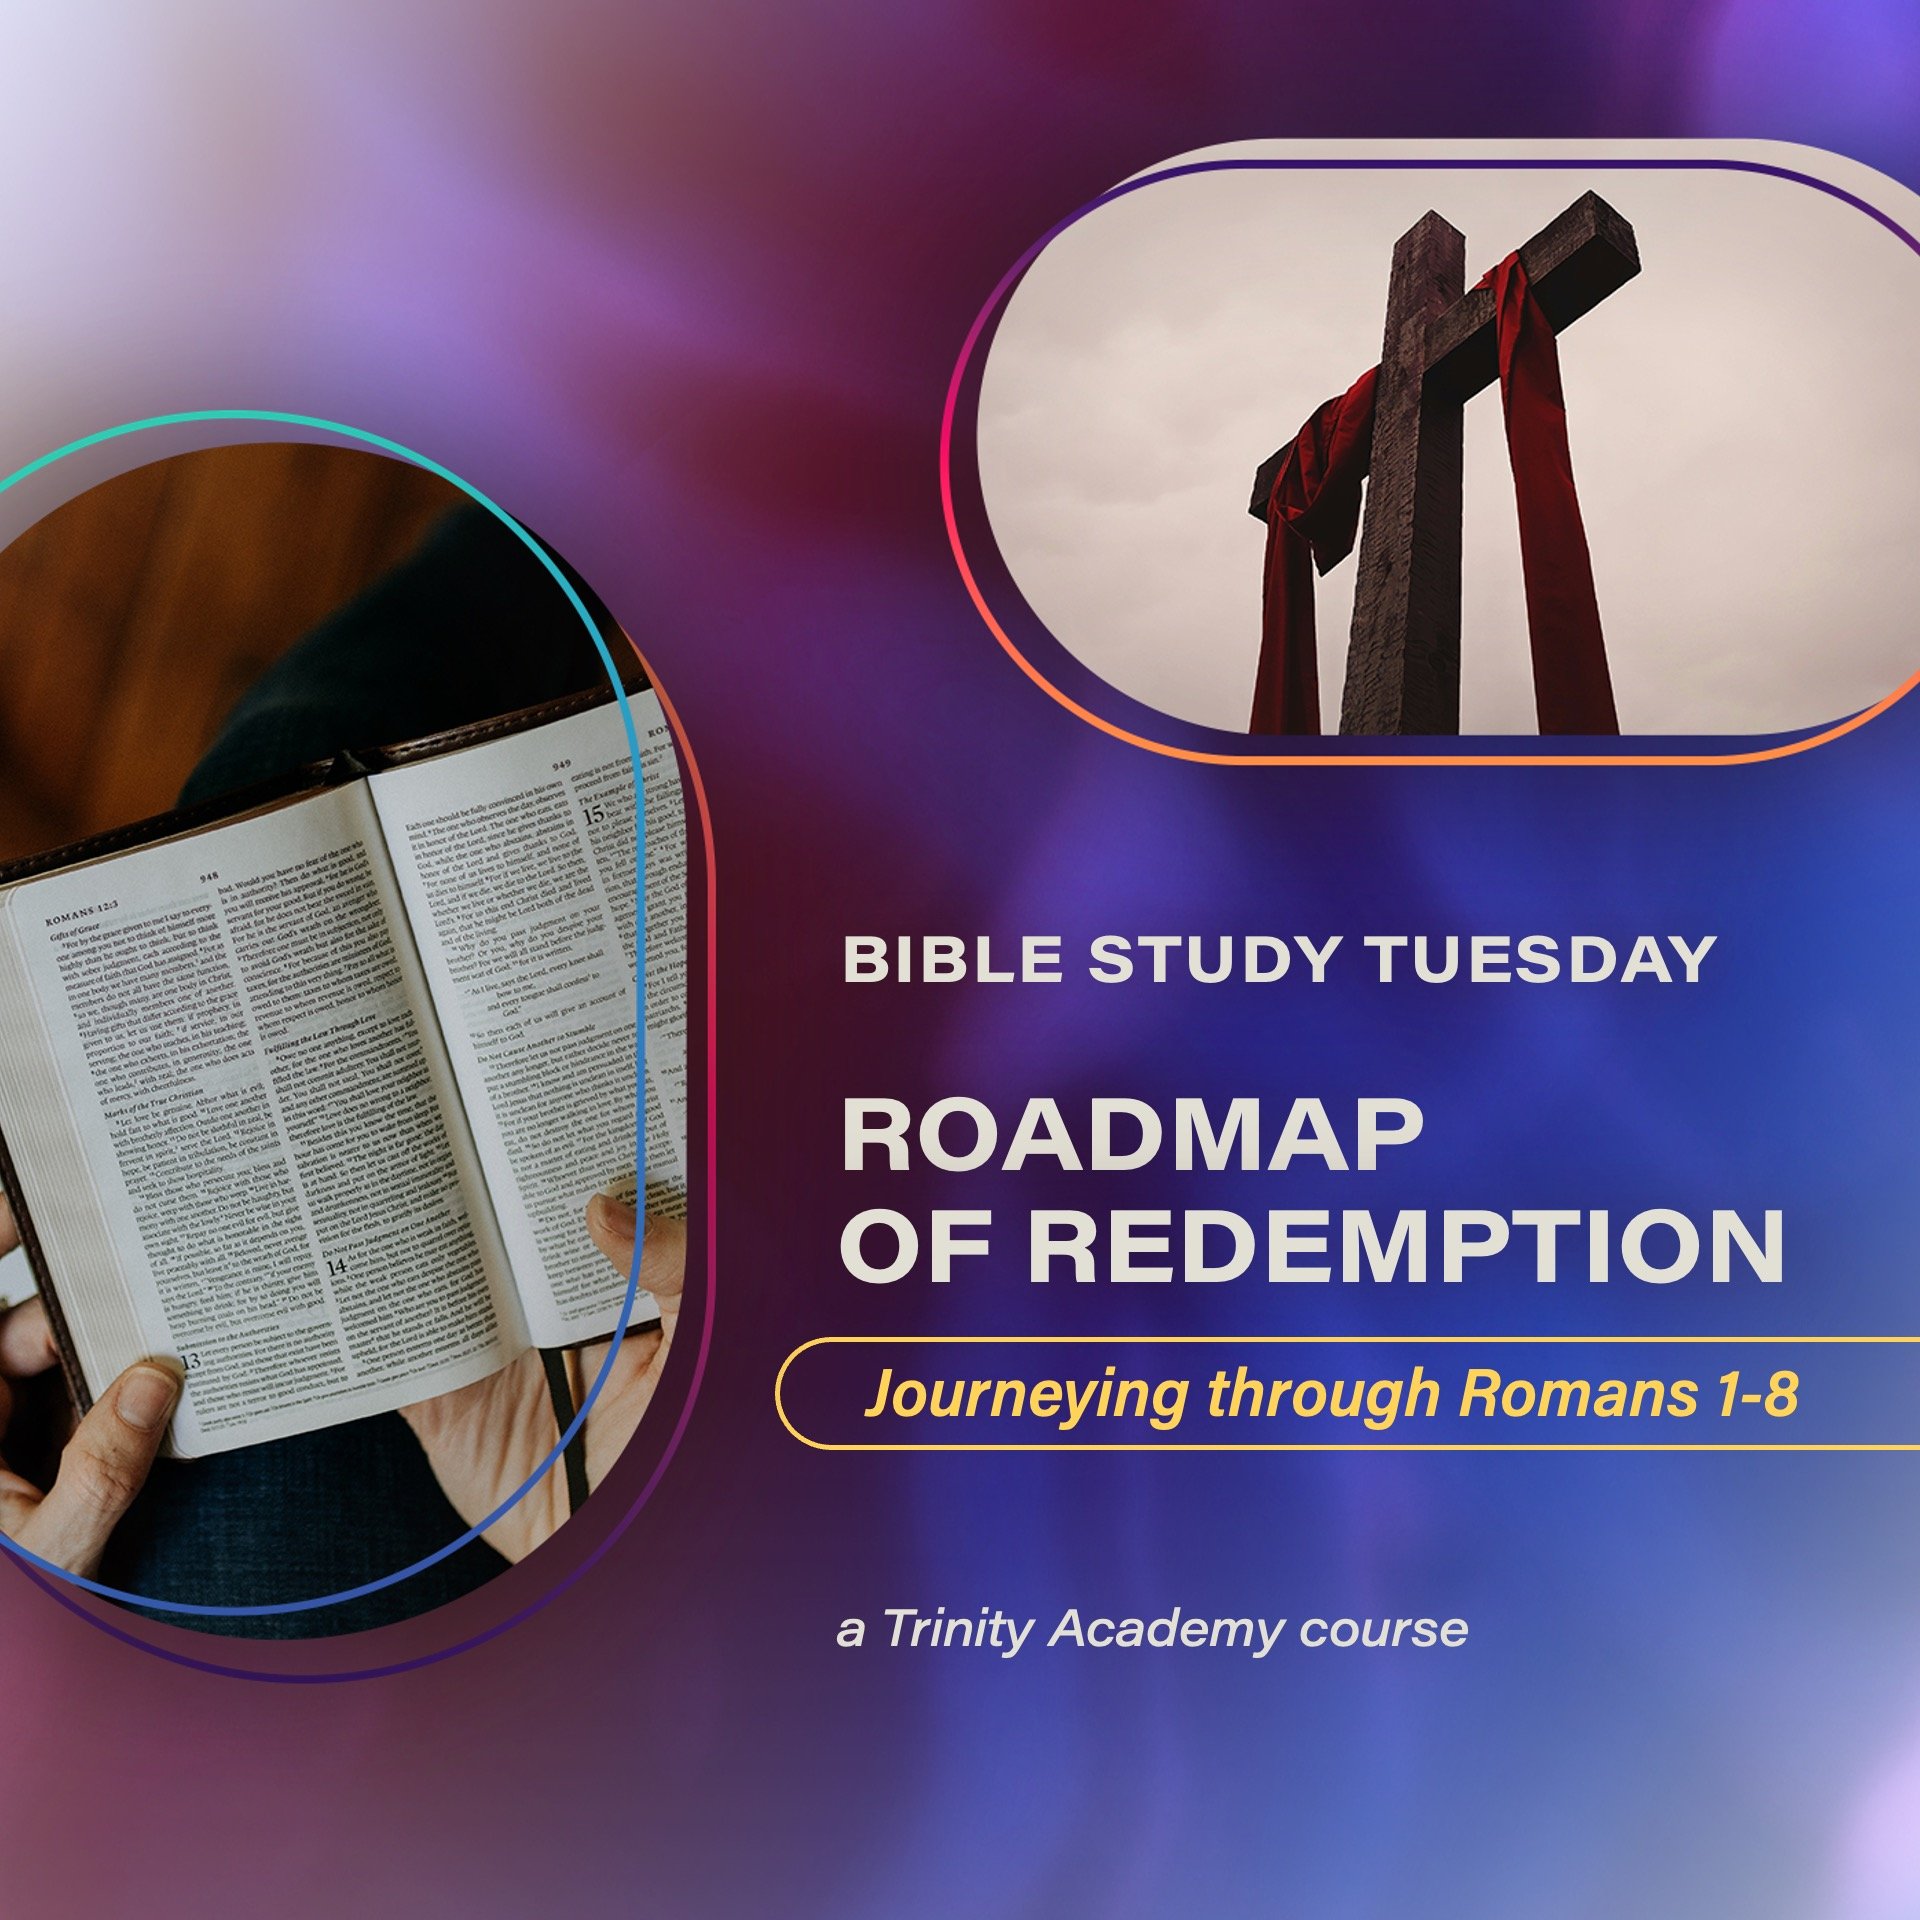 Bible Study Tuesday: Roadmap of Redemption - Journeying through Romans 1-8